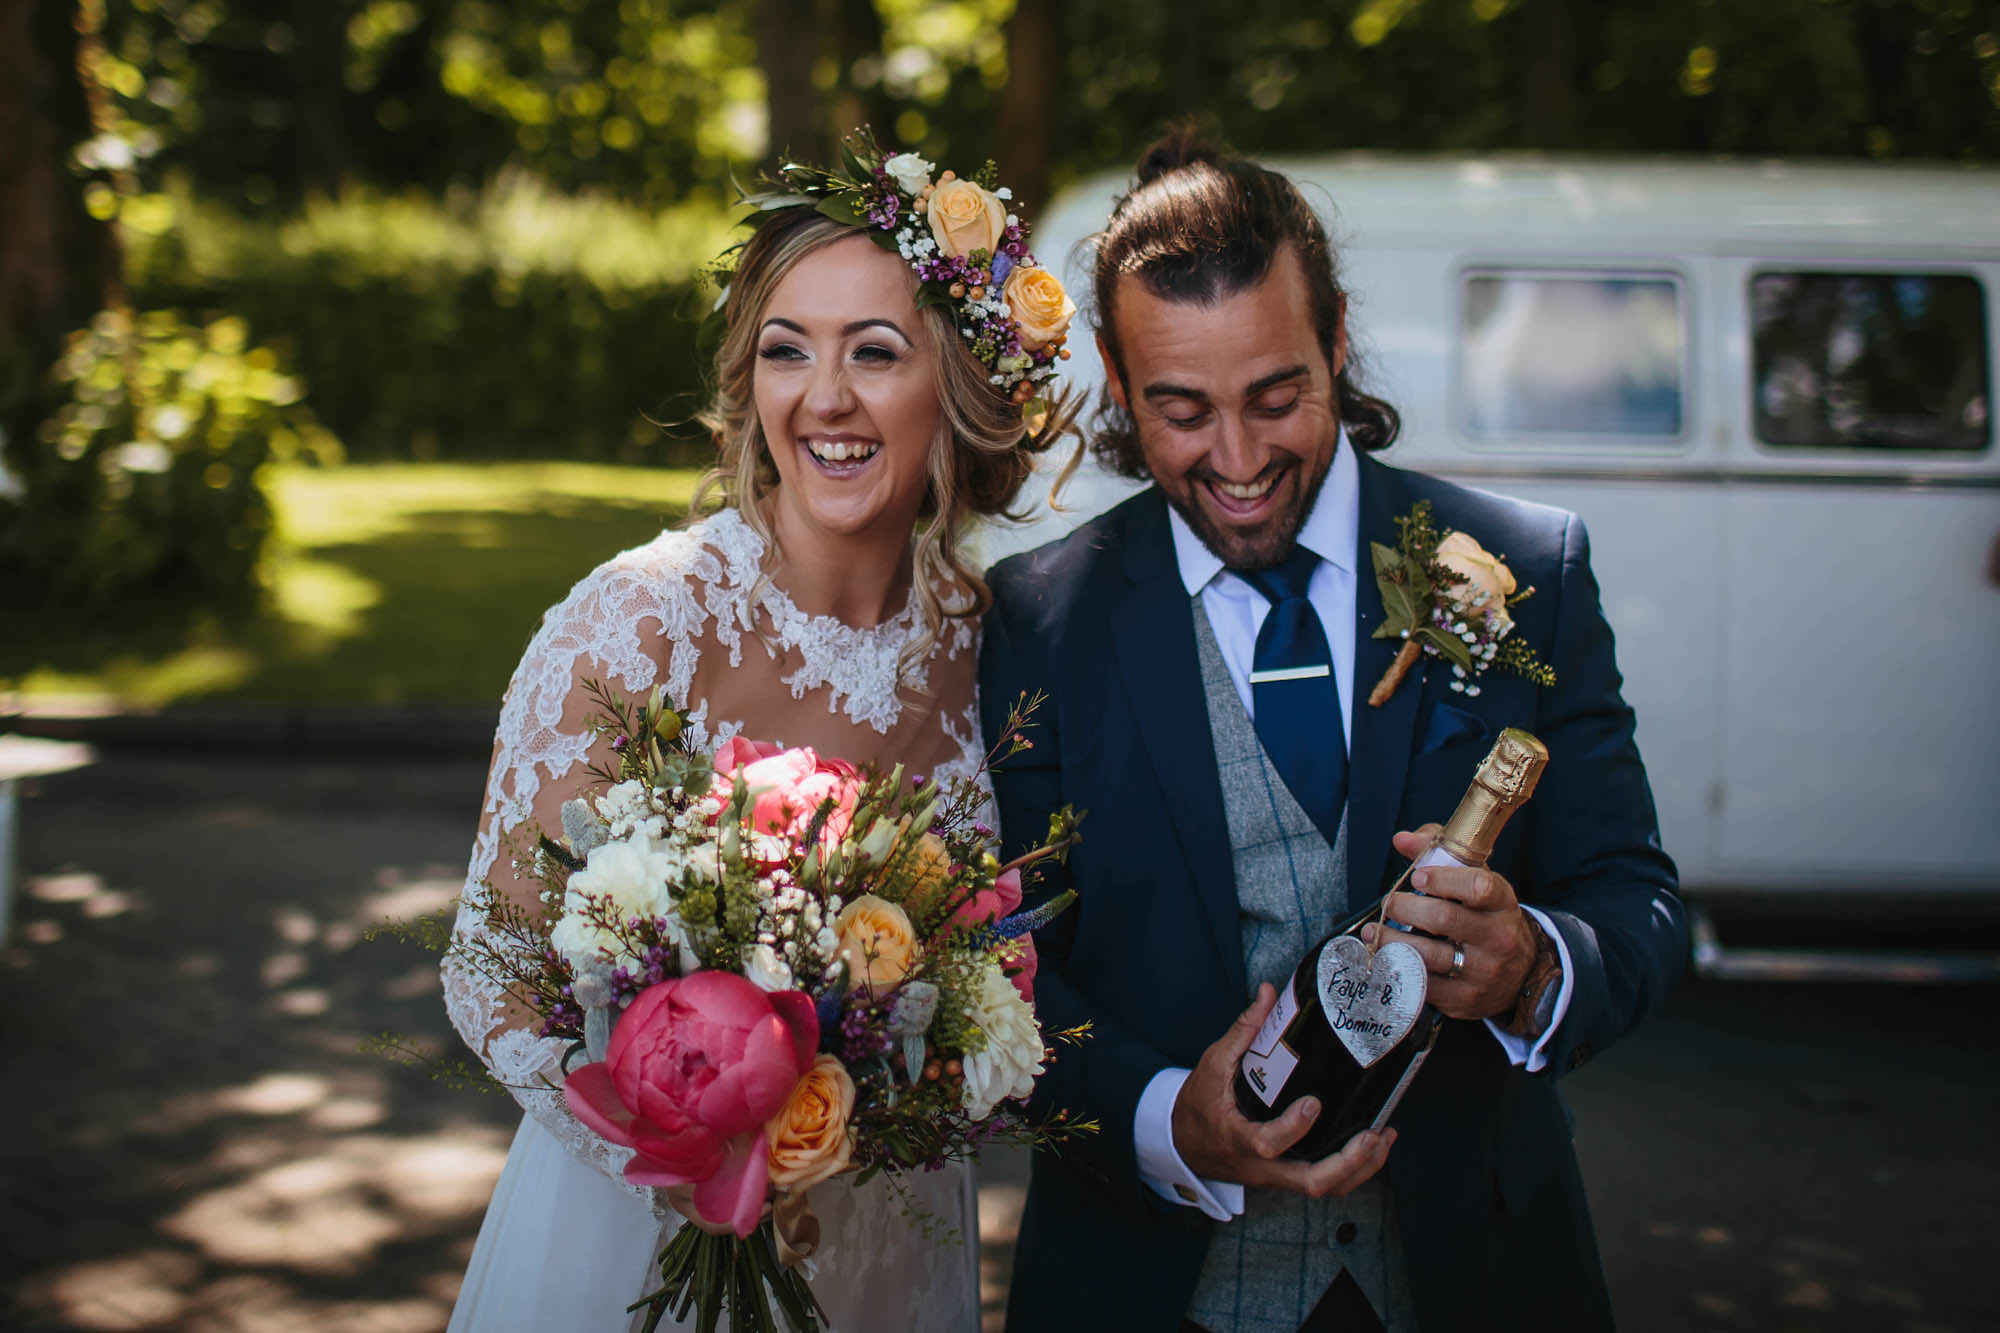 Bride and groom laughing as they hold a bottle of champagne at their wedding